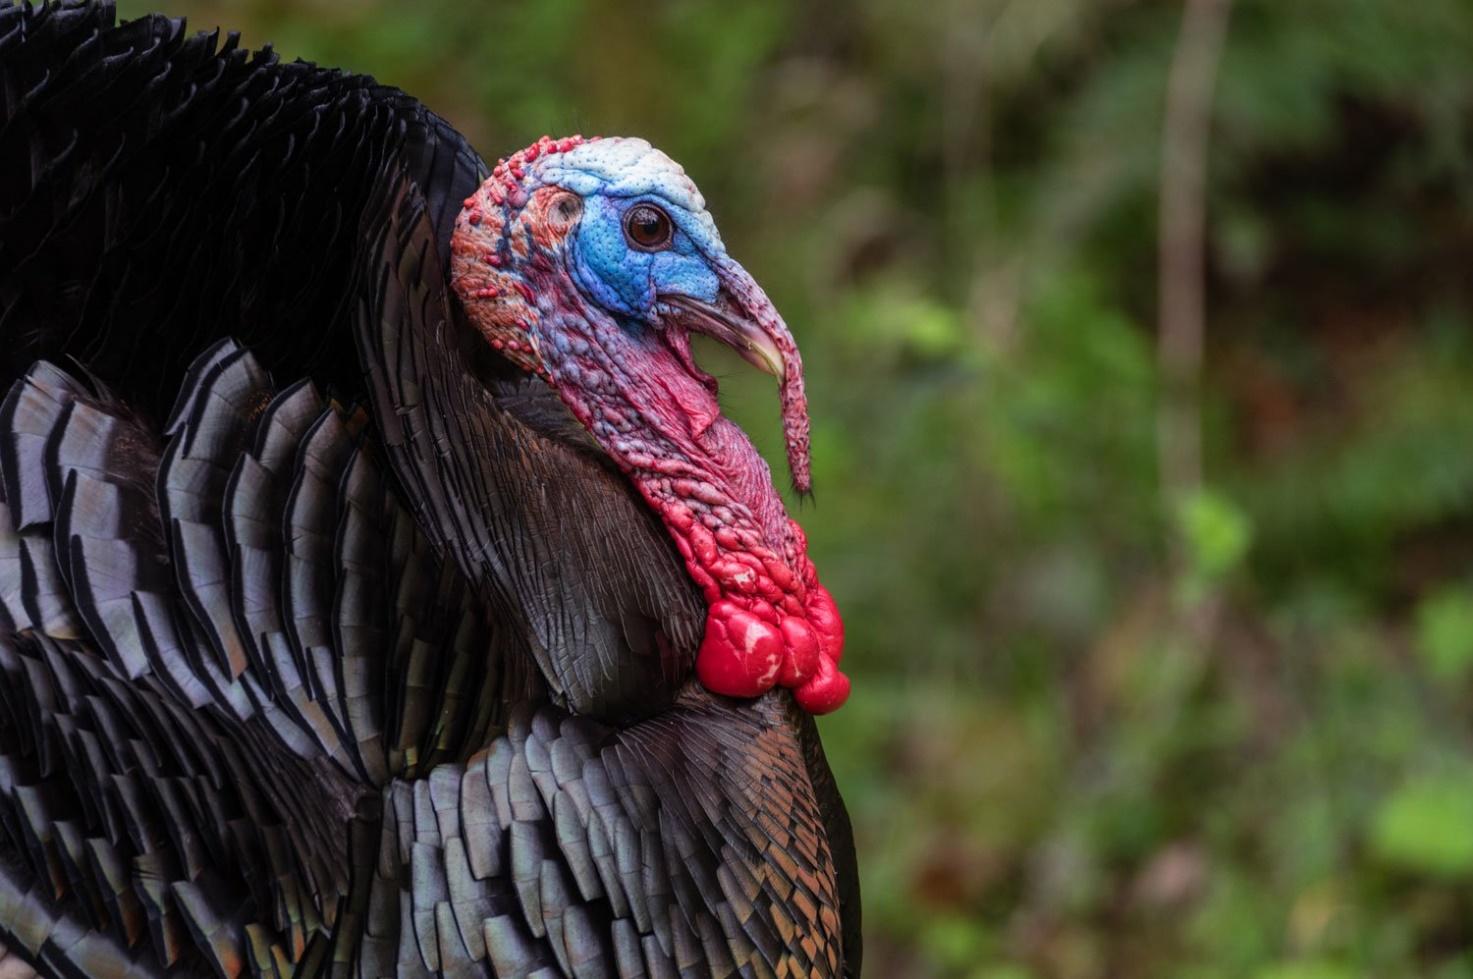 Big male wild turkey with black shinny feathers, bluish head with red flesh dangling from the nose and chin called the snood and wattle.